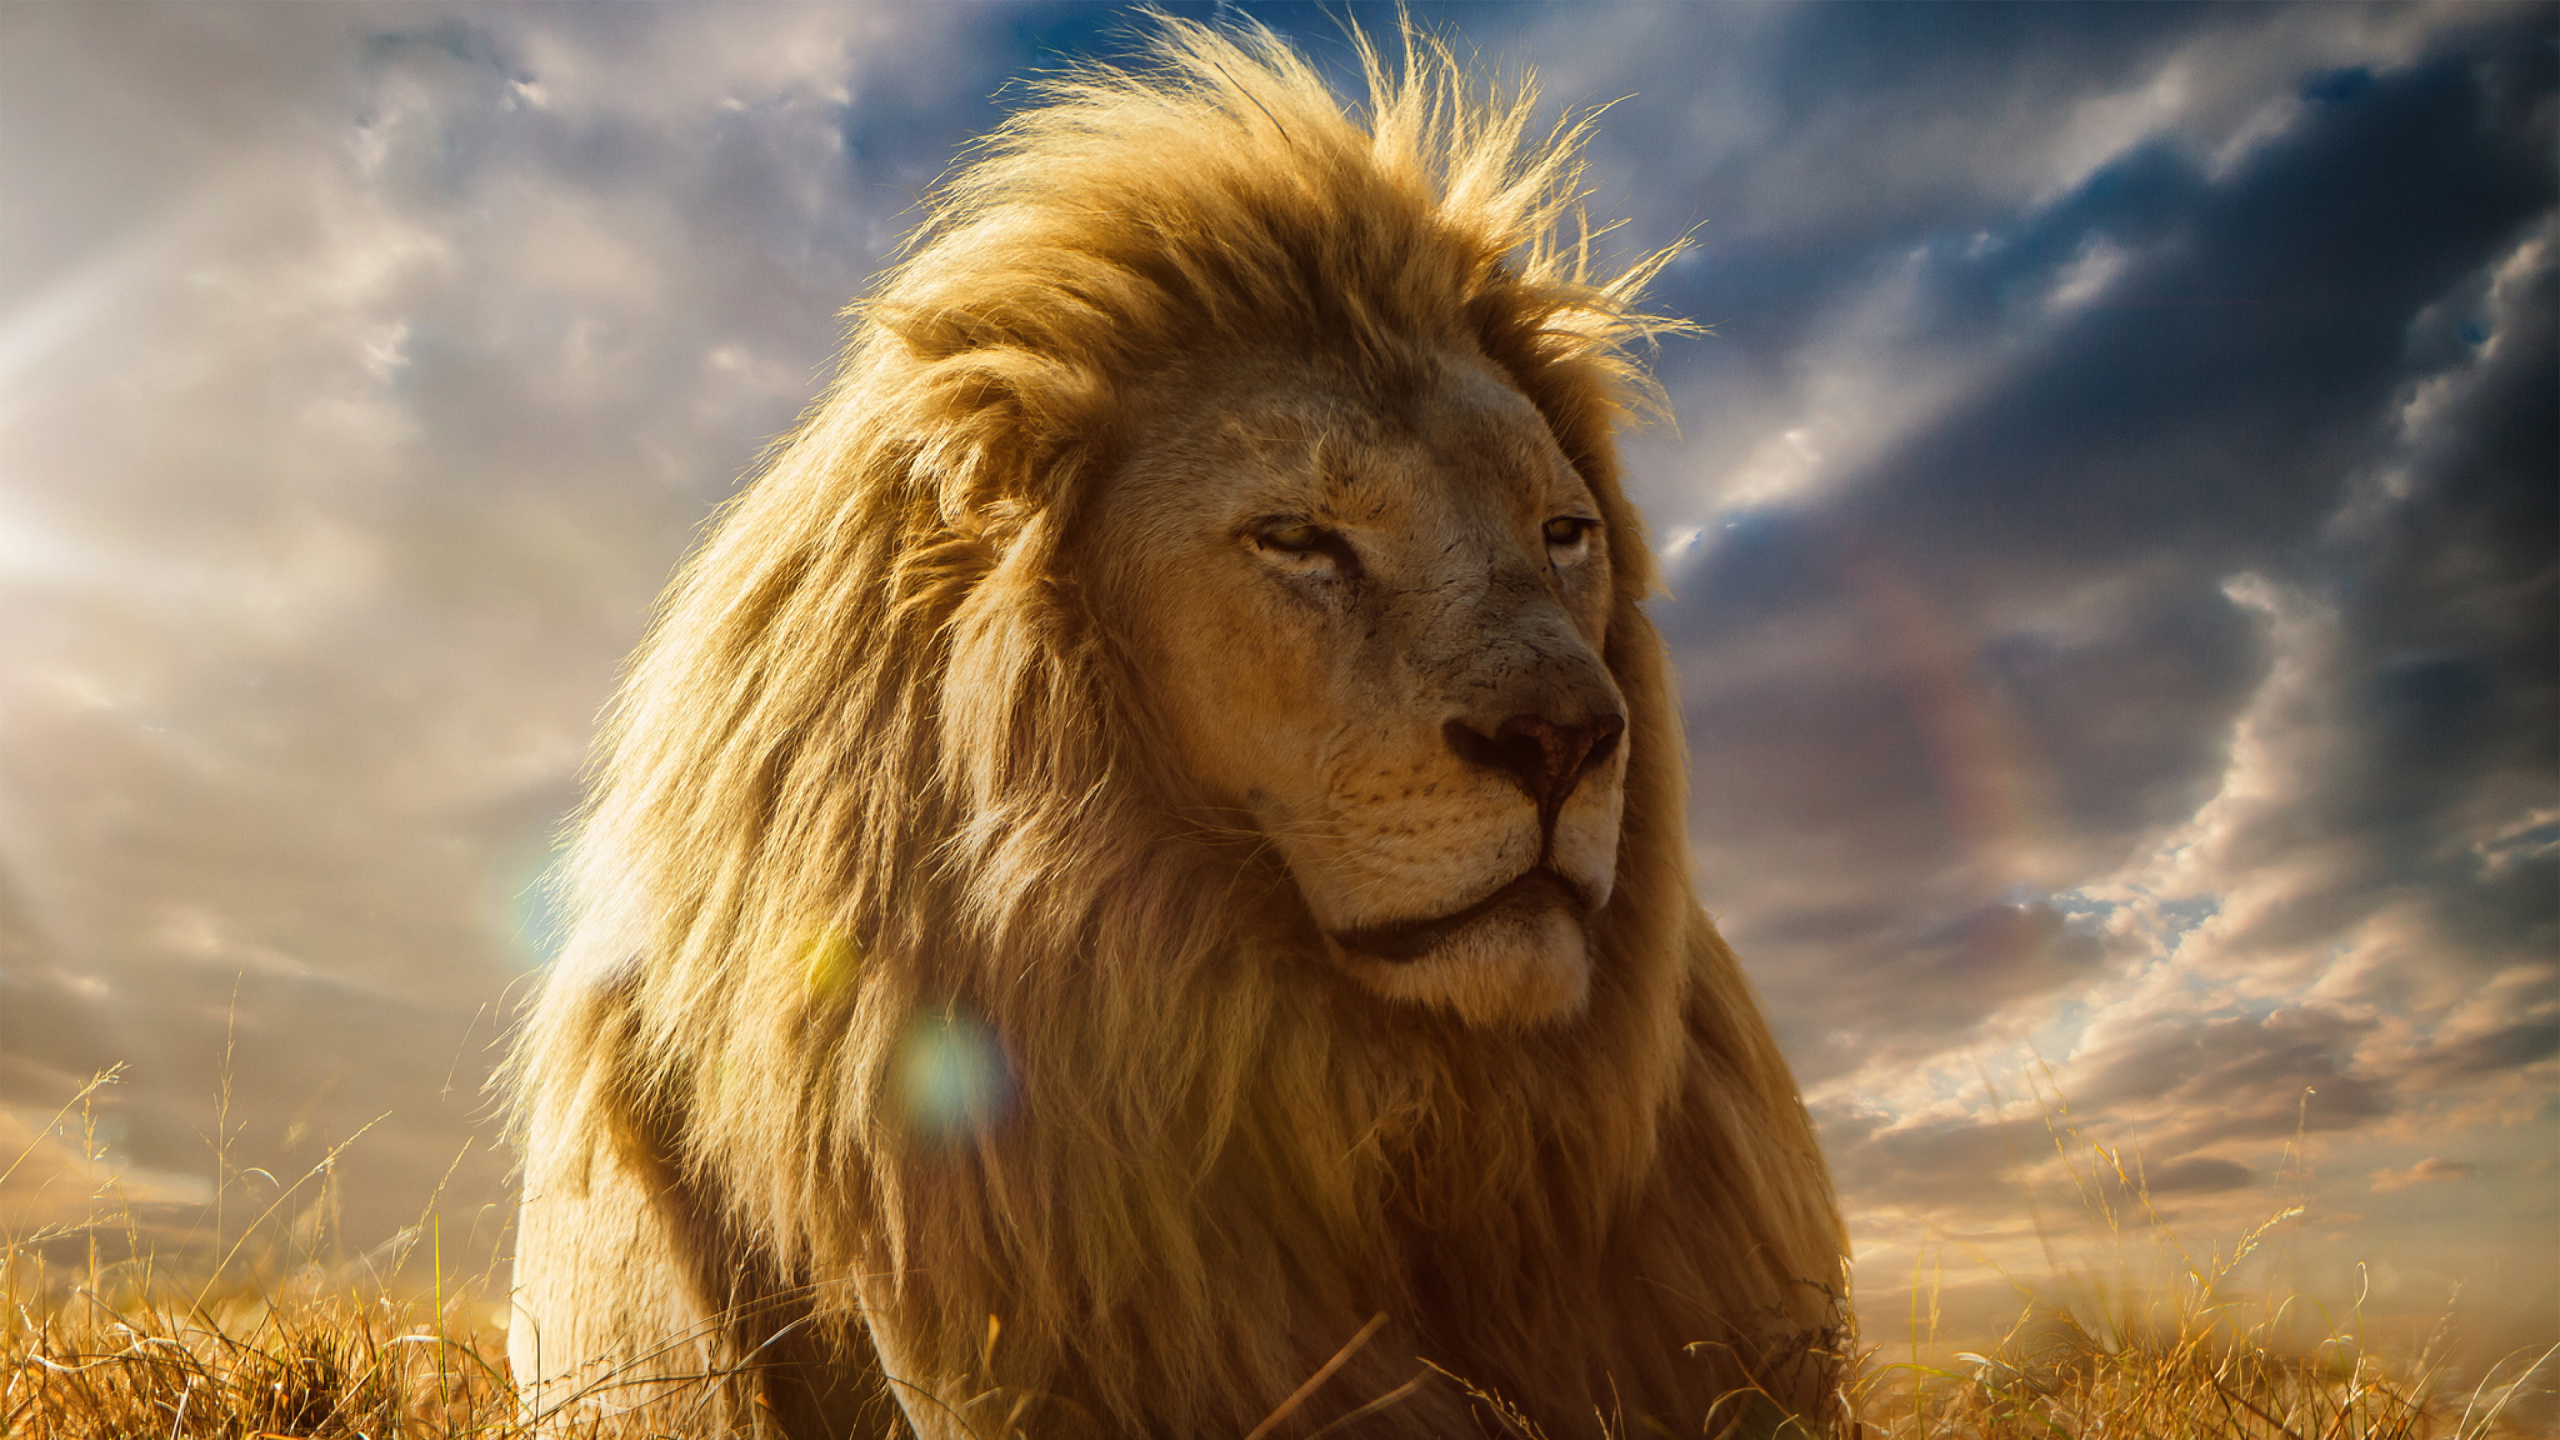 Lion Under Blue Sky and White Clouds During Daytime. Wallpaper in 2560x1440 Resolution